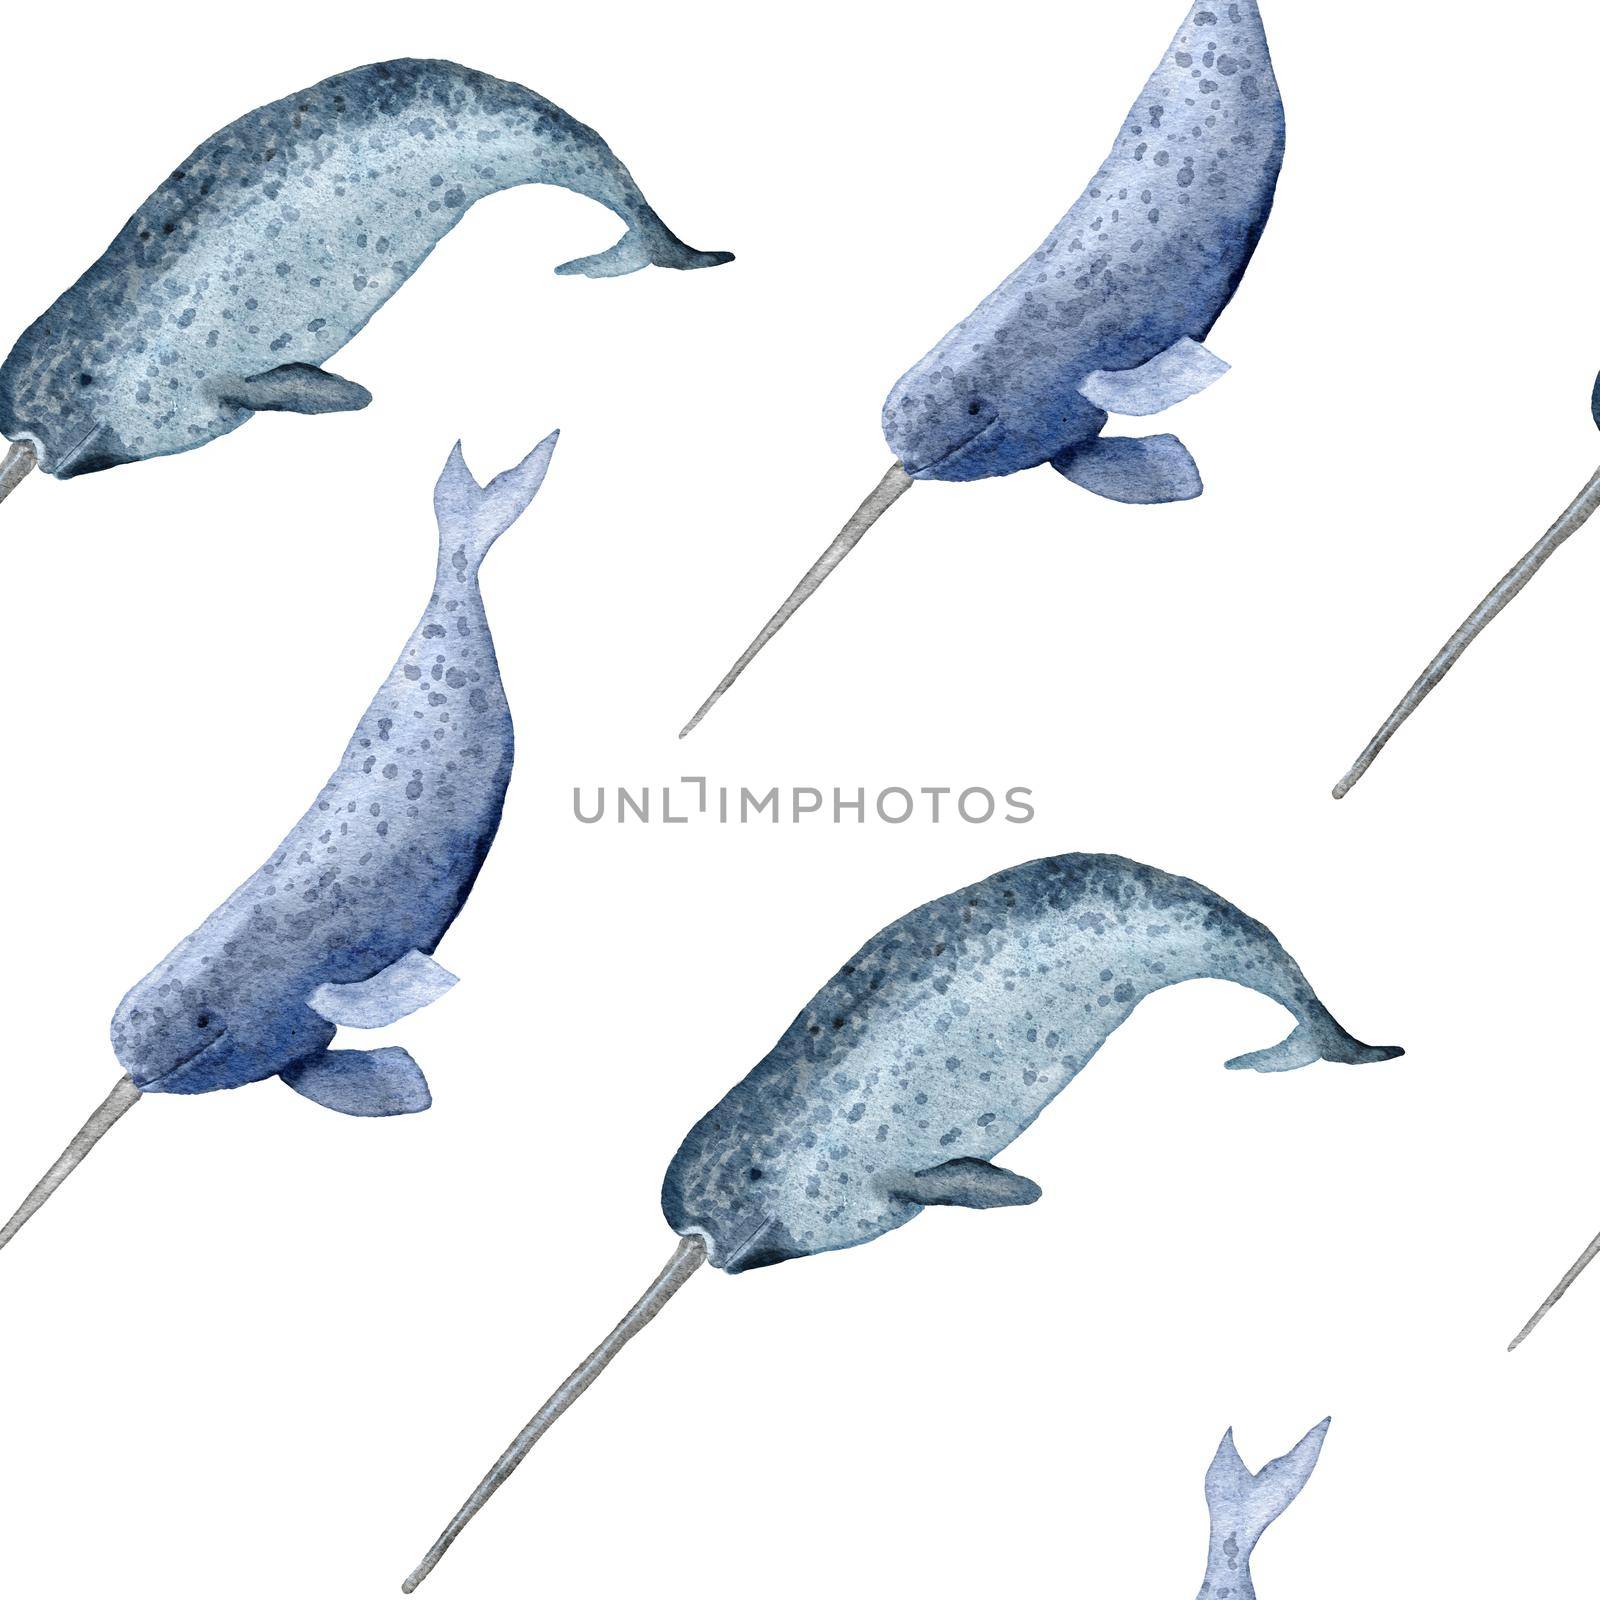 Hand drawn watercolor seamless pattern with narwhal. Sea ocean marine animal, nautical underwater endangered mammal species. Blue gray illustration for fabric nursery decor, under the sea prints. by Lagmar